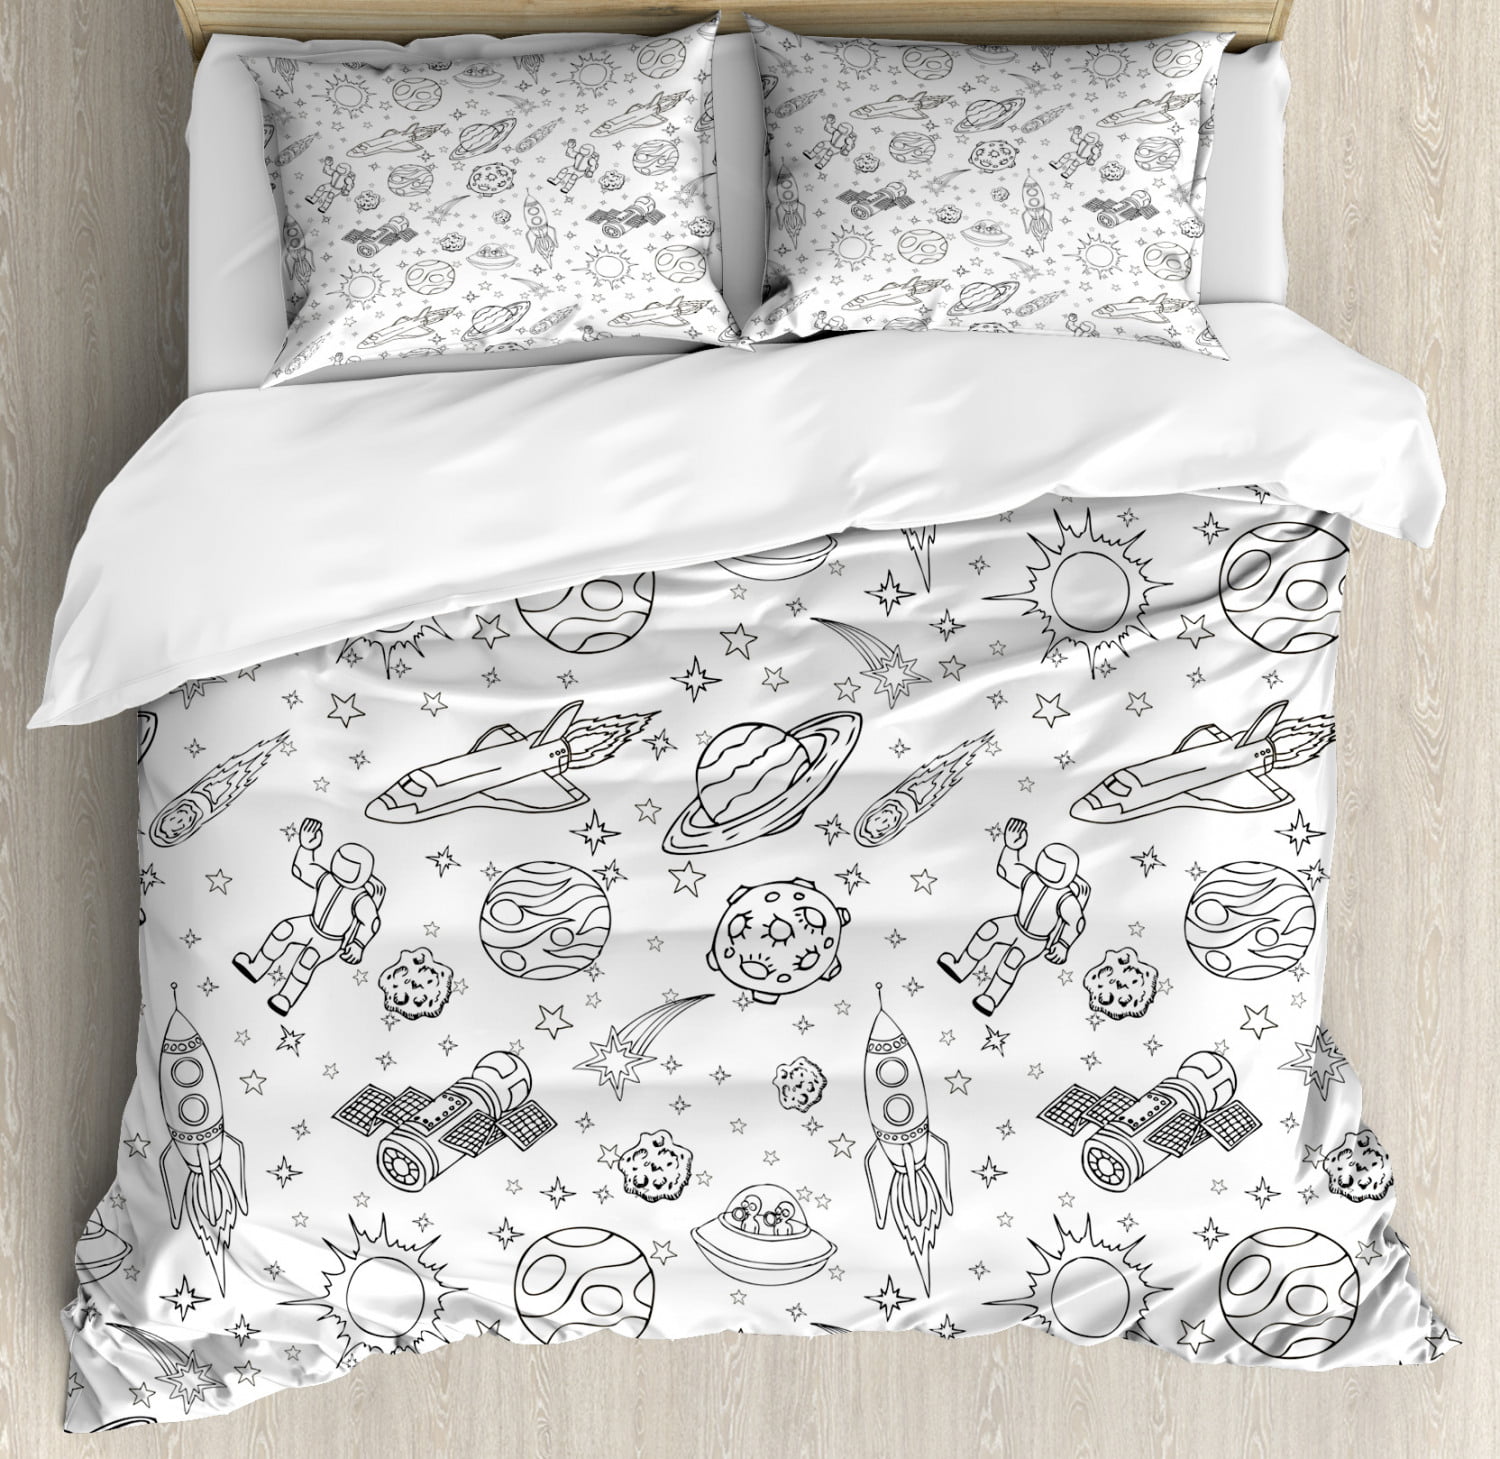 Four Styles Character Themes Duvet Cover Spaceman Space Suit Boys Duvet Set Basketball Comforter Cover Kids Room Decor